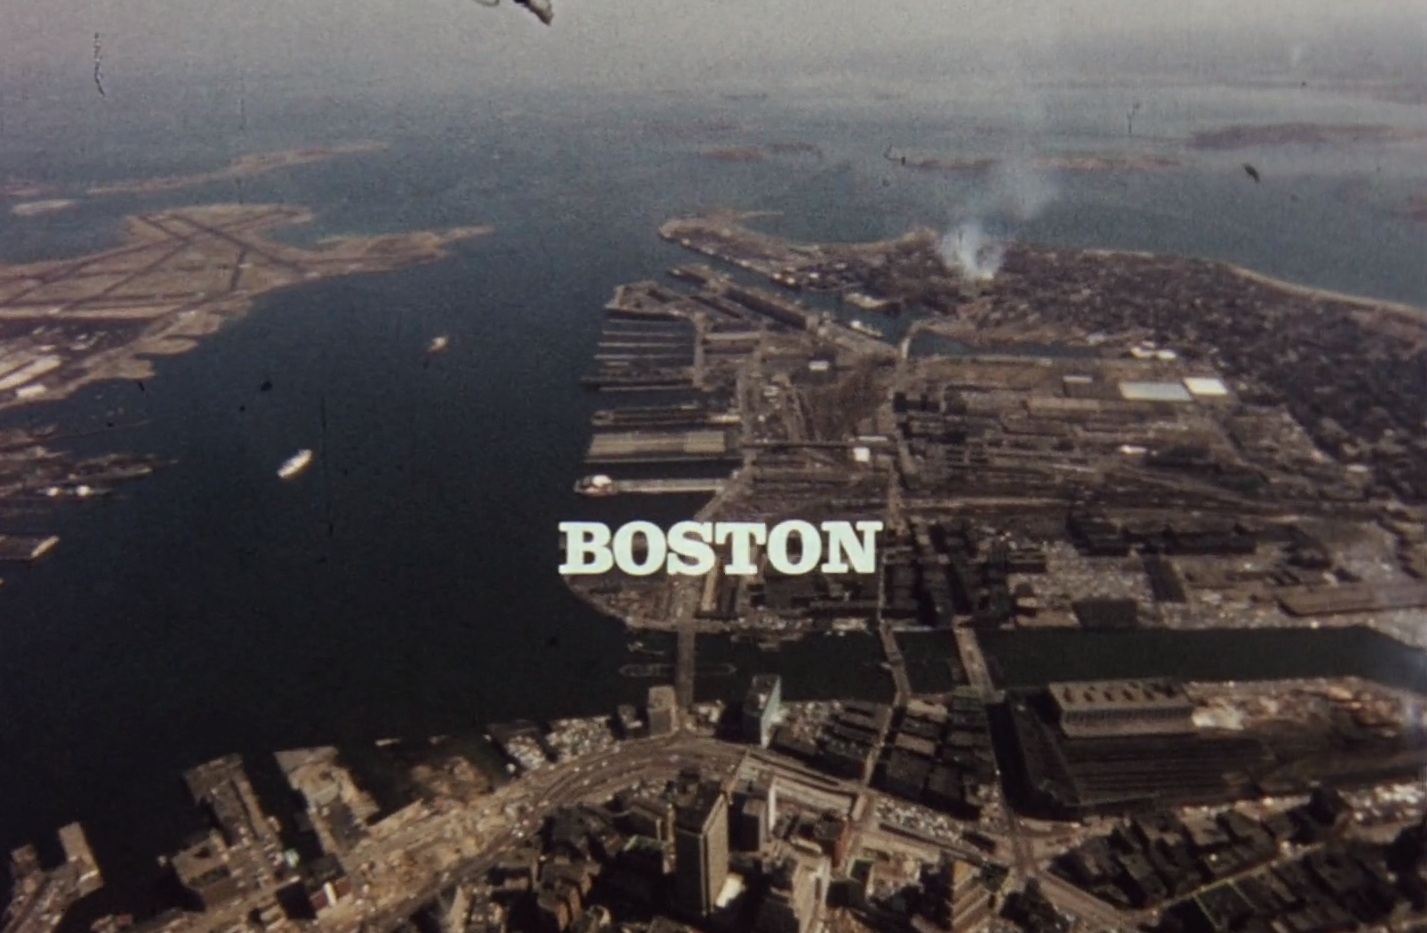 How dirty was Boston 50 years ago? ‘The harbor was used as a waste bin’